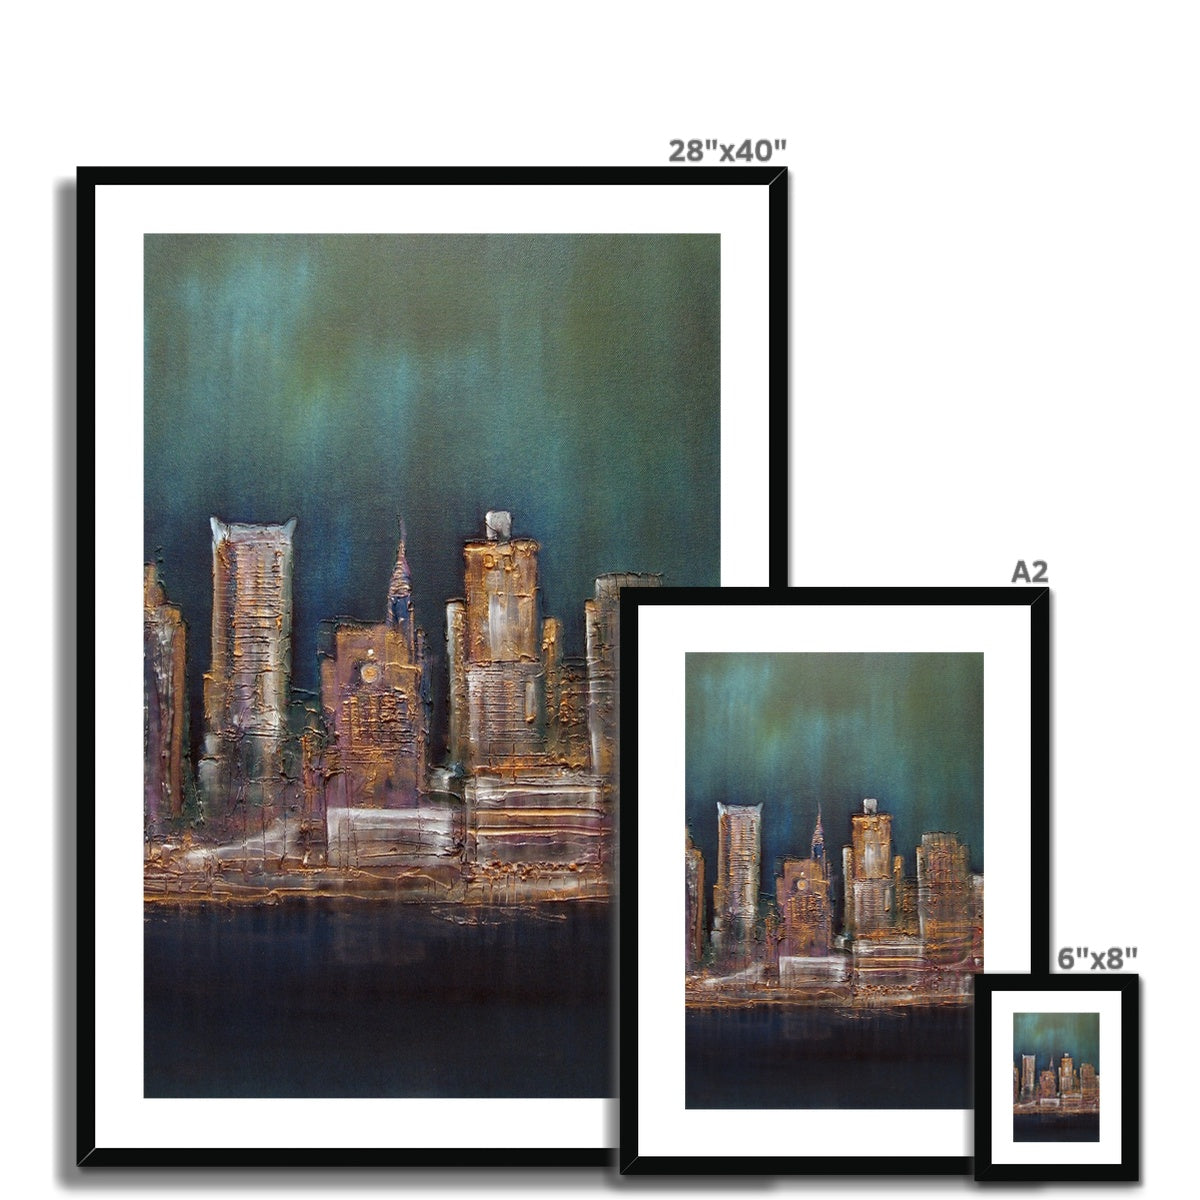 New York West Side Painting | Framed & Mounted Prints From Scotland-Framed & Mounted Prints-World Art Gallery-Paintings, Prints, Homeware, Art Gifts From Scotland By Scottish Artist Kevin Hunter